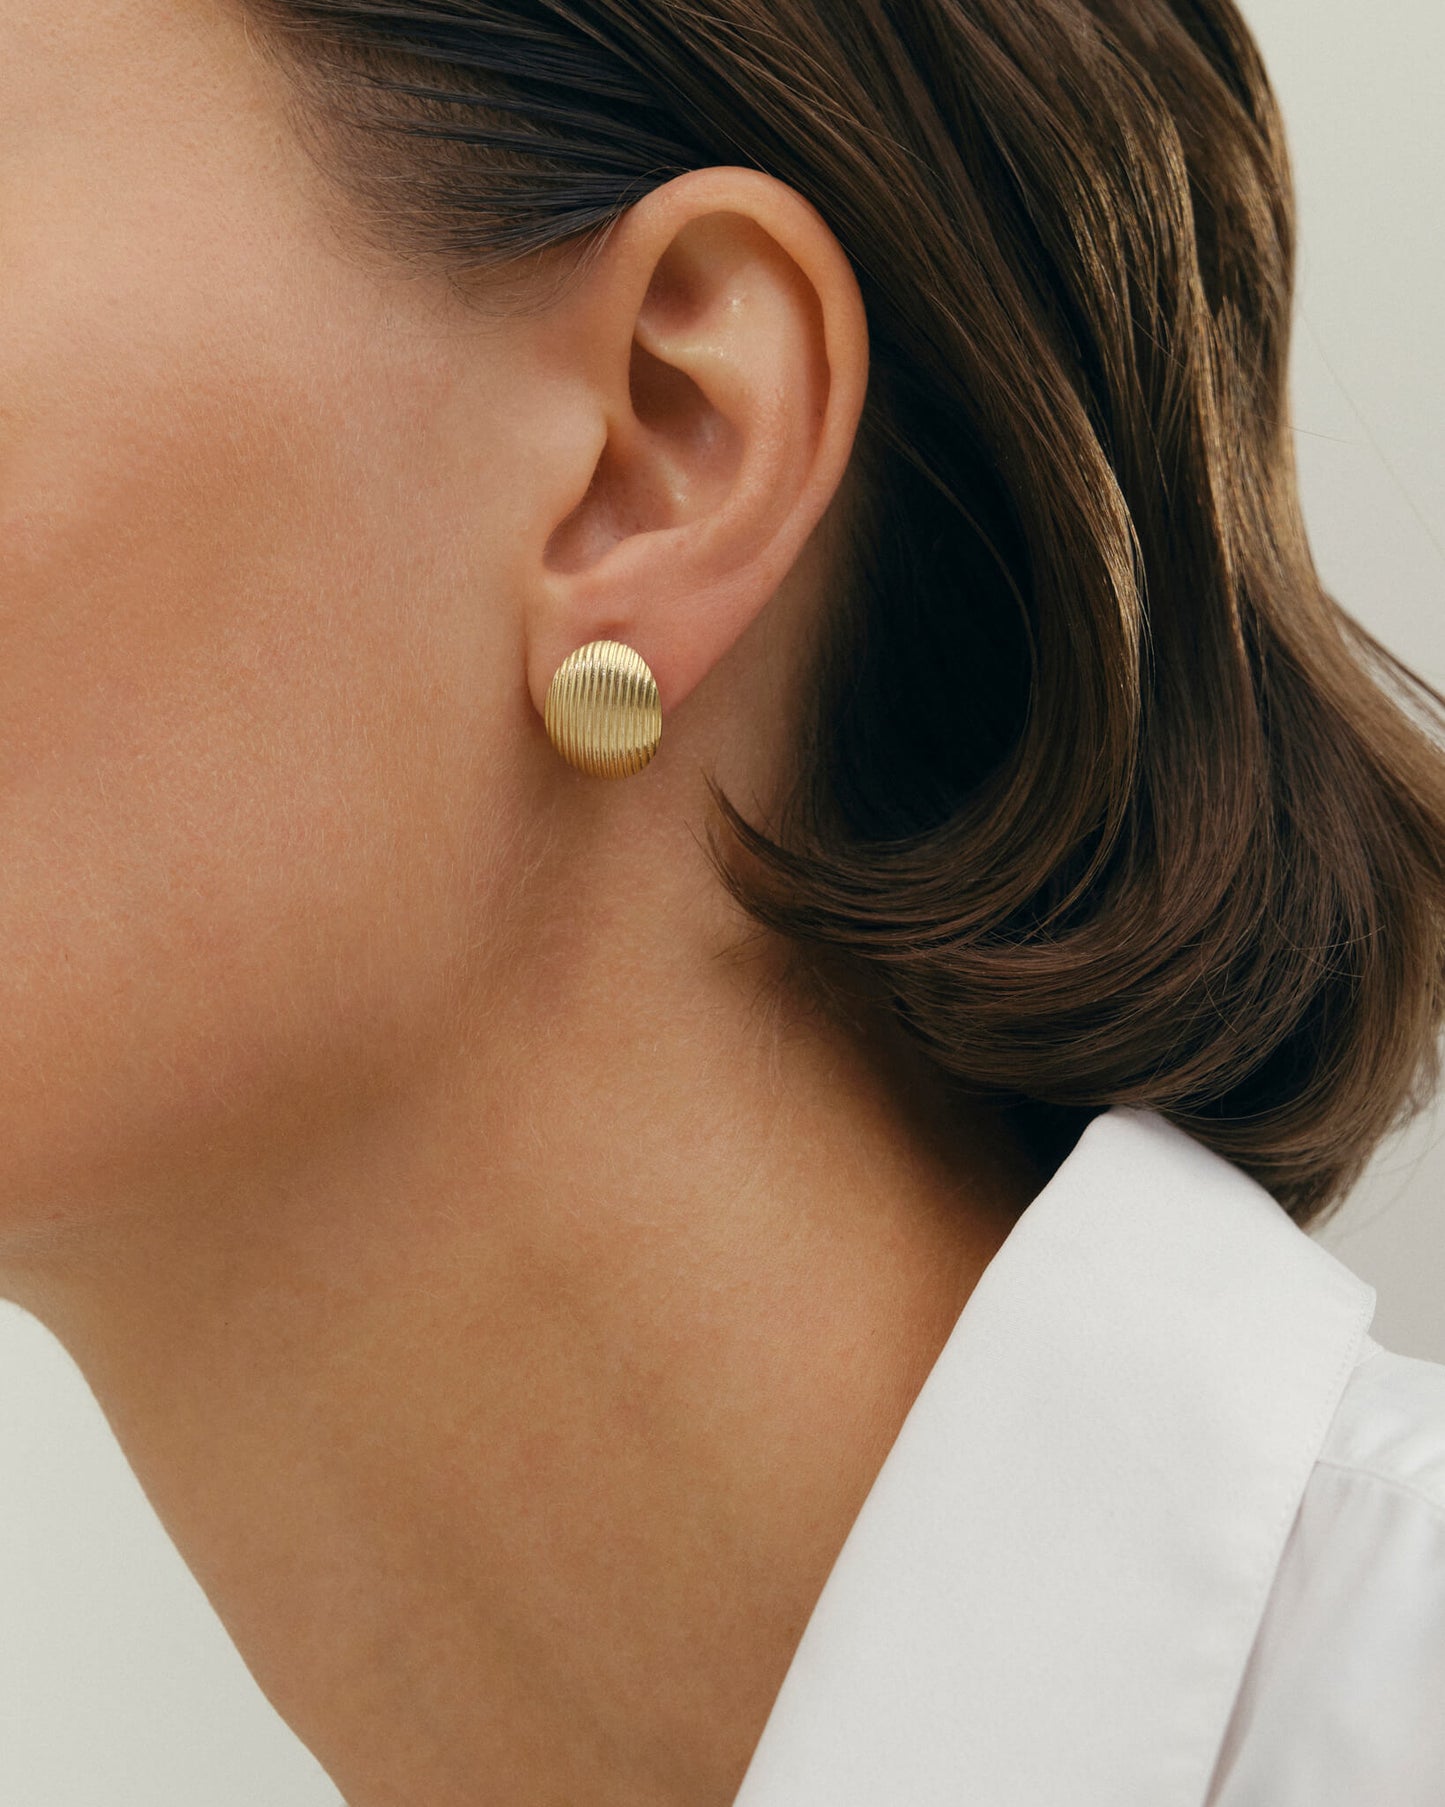 Structural earrings